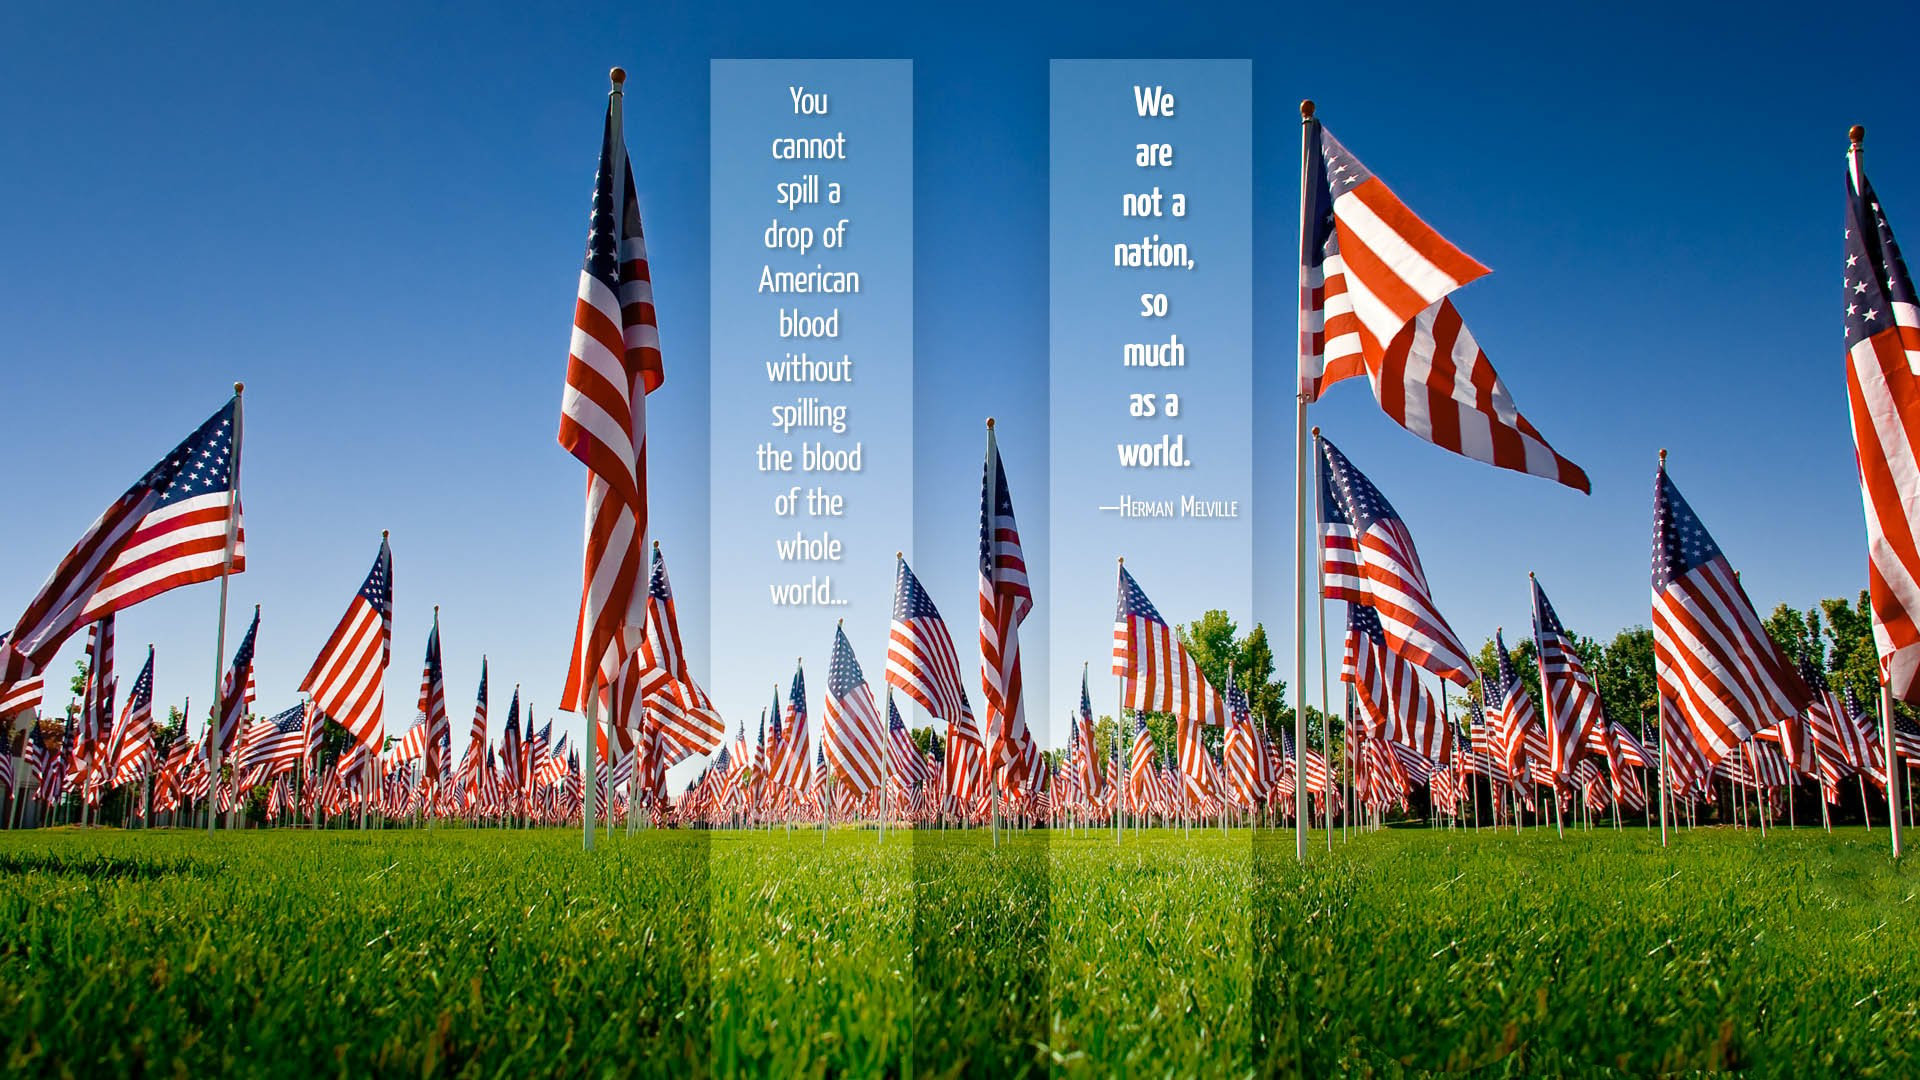 In honor of September 11 here are eight patriotic wallpapers that I